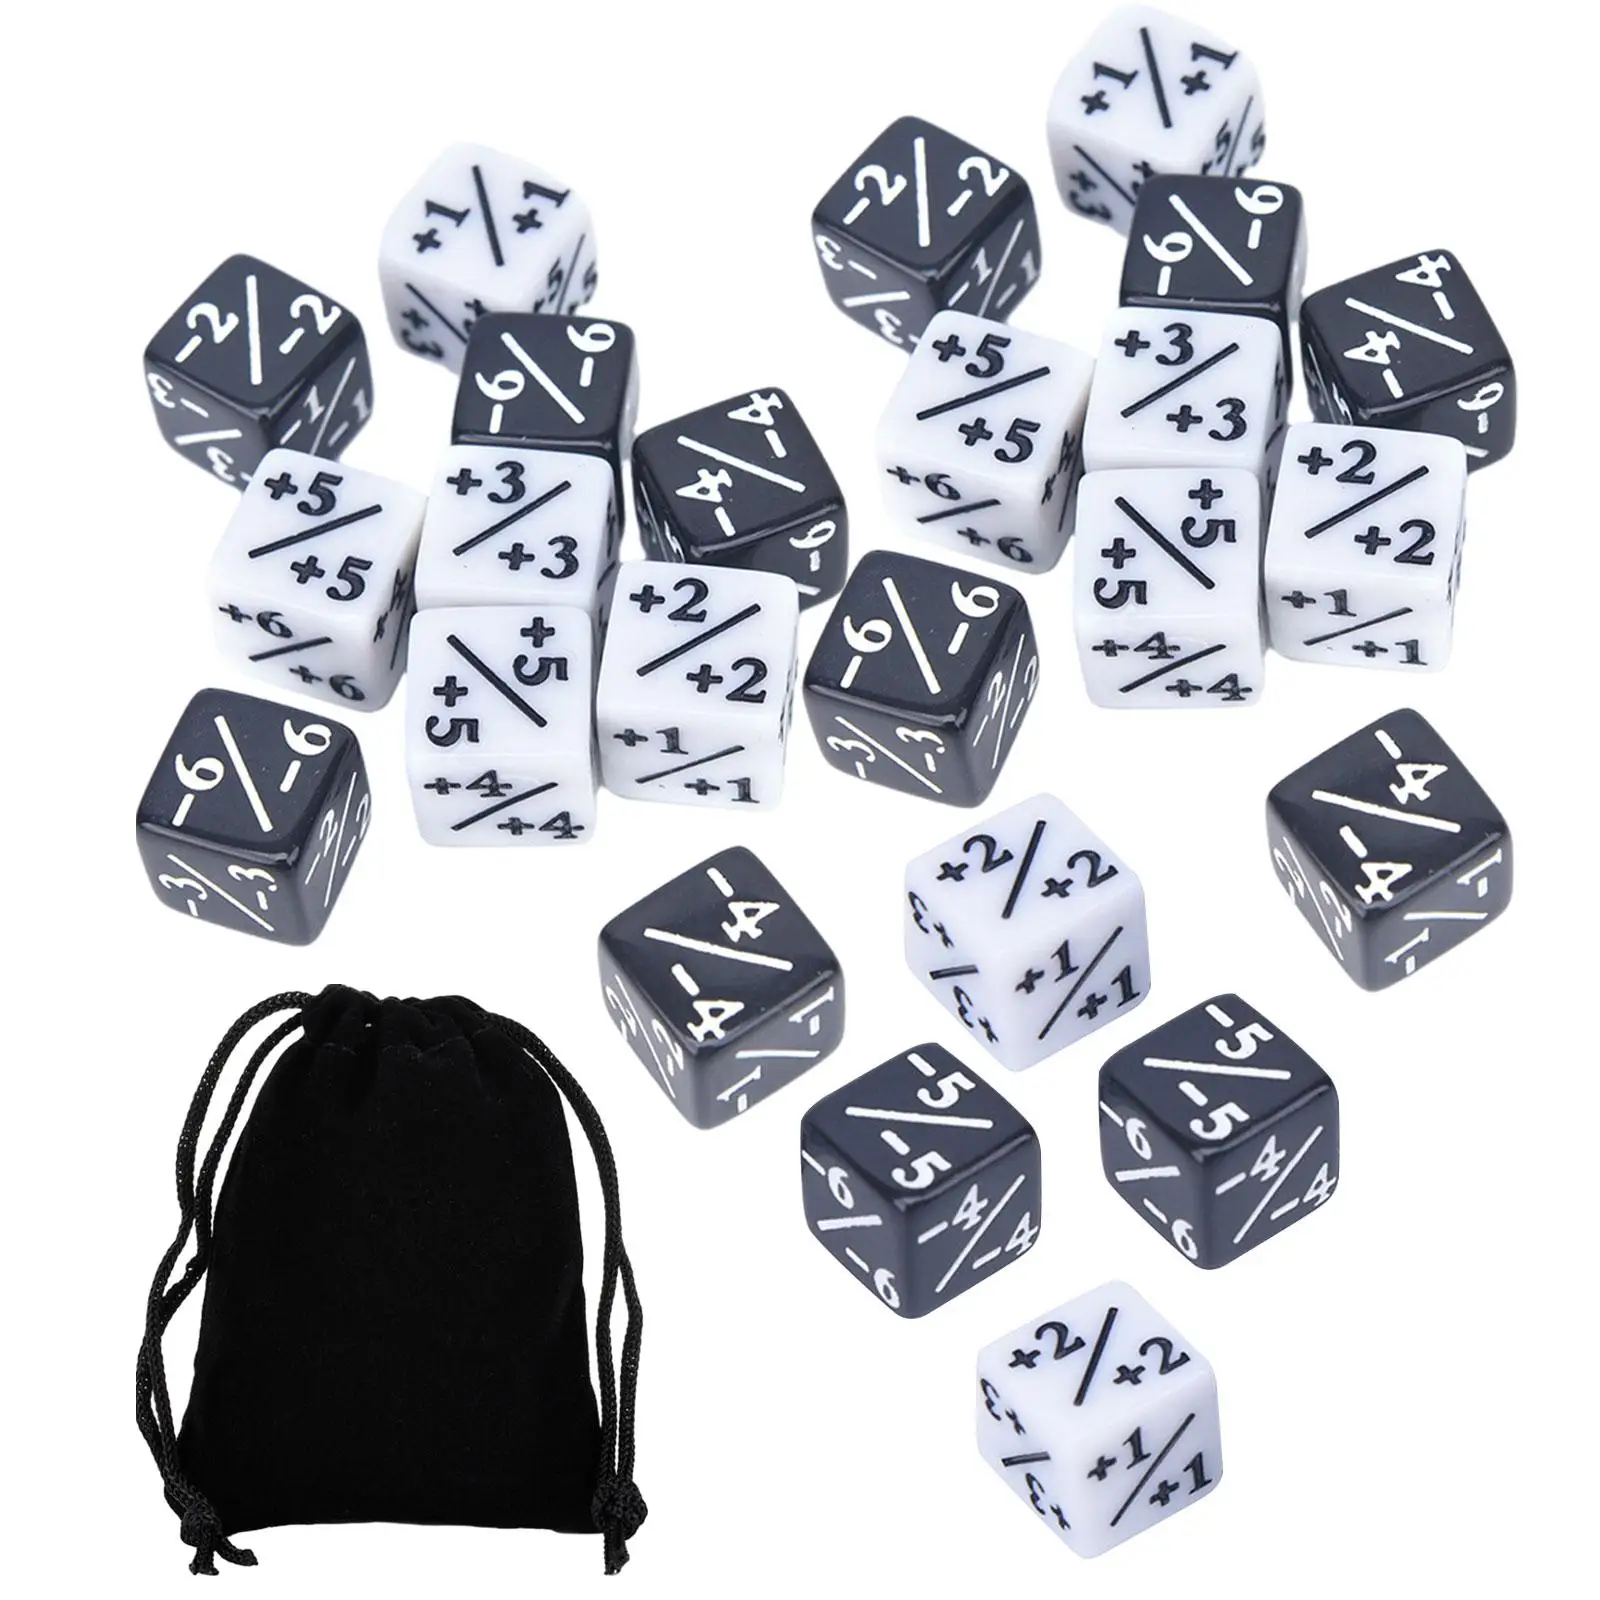 24 Pieces Counter Token Dice Tracking Counter Dices Educational Toy Math Teaching for Card Gaming Accessory (Black and White)